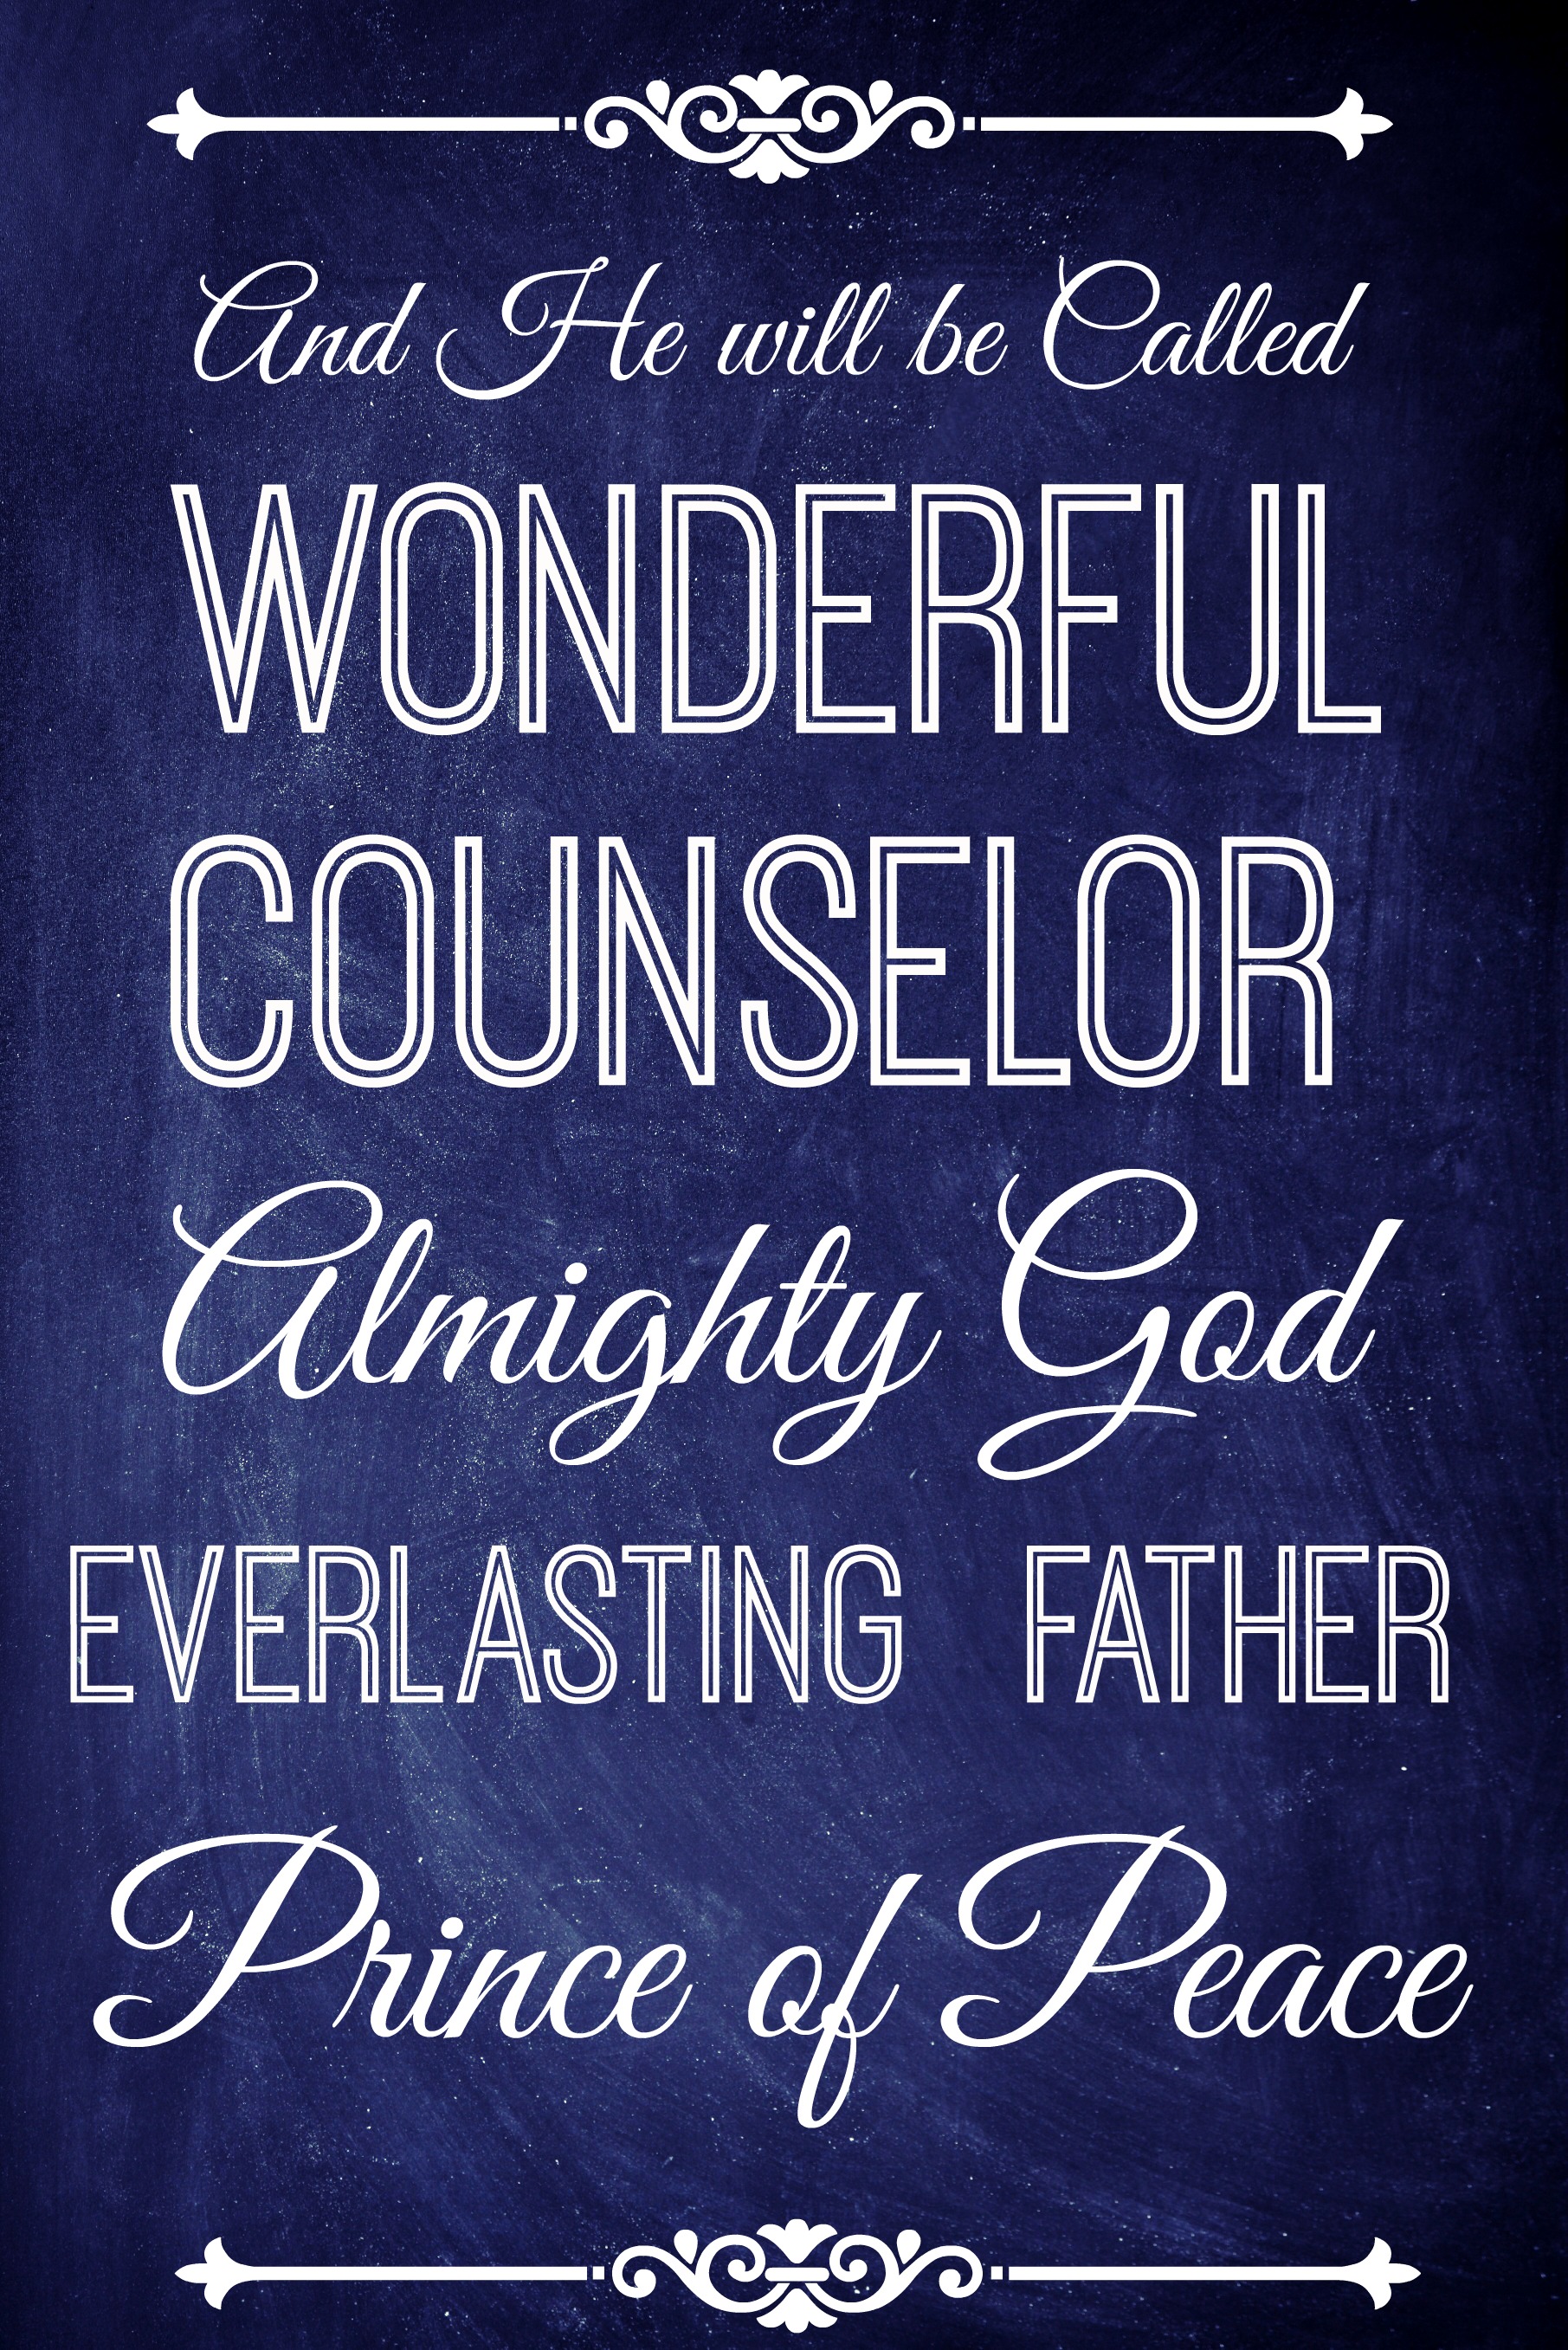 Holiday Quote Images Wonderful Counselor Prince of Peace